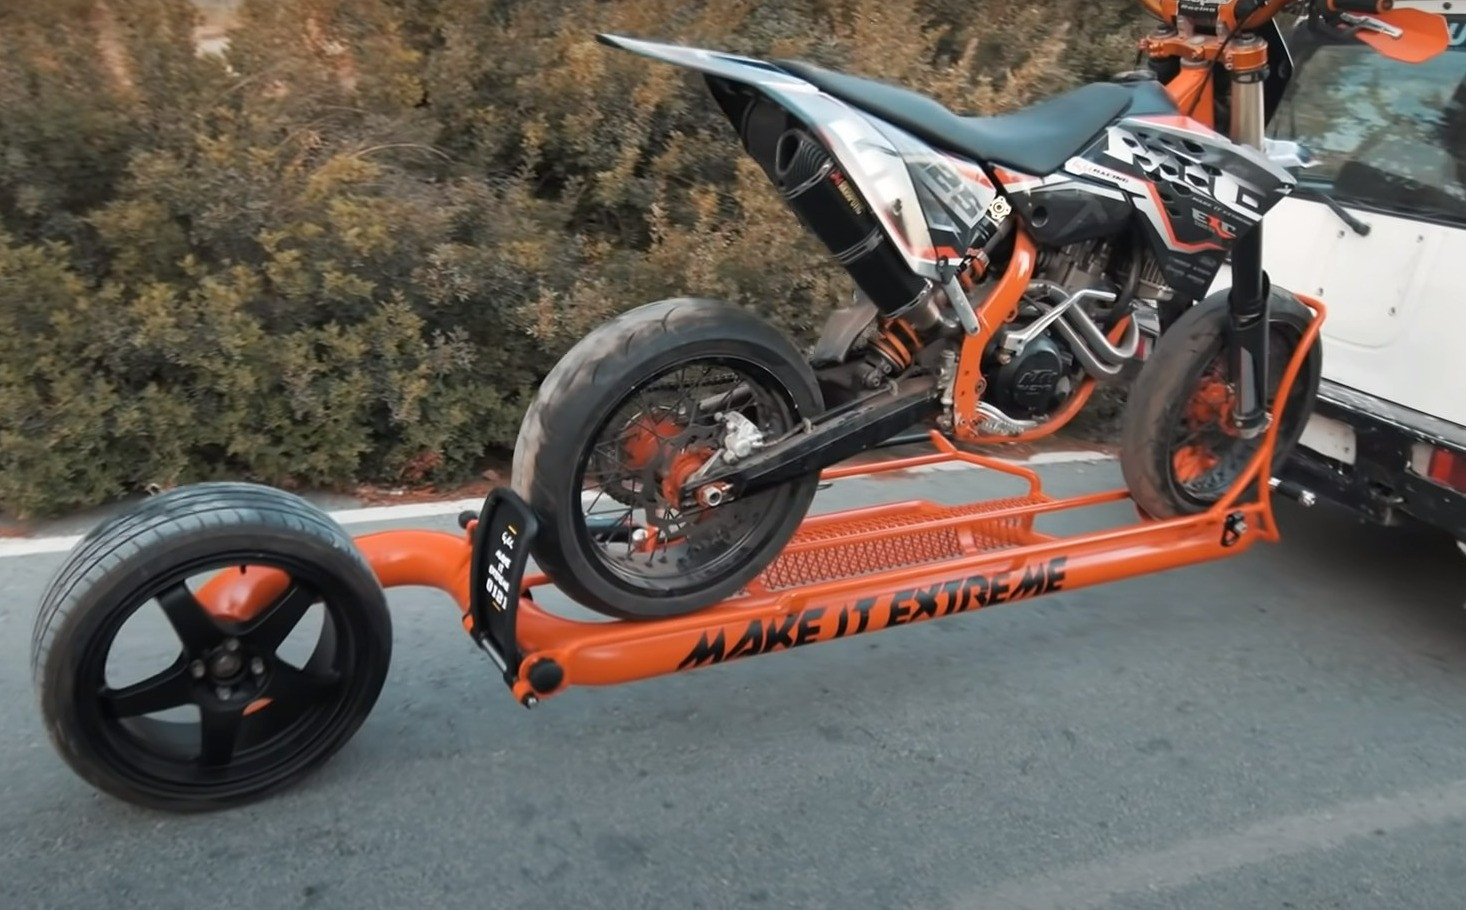 How To Build A Motorcycle Trailer? - PostureInfoHub